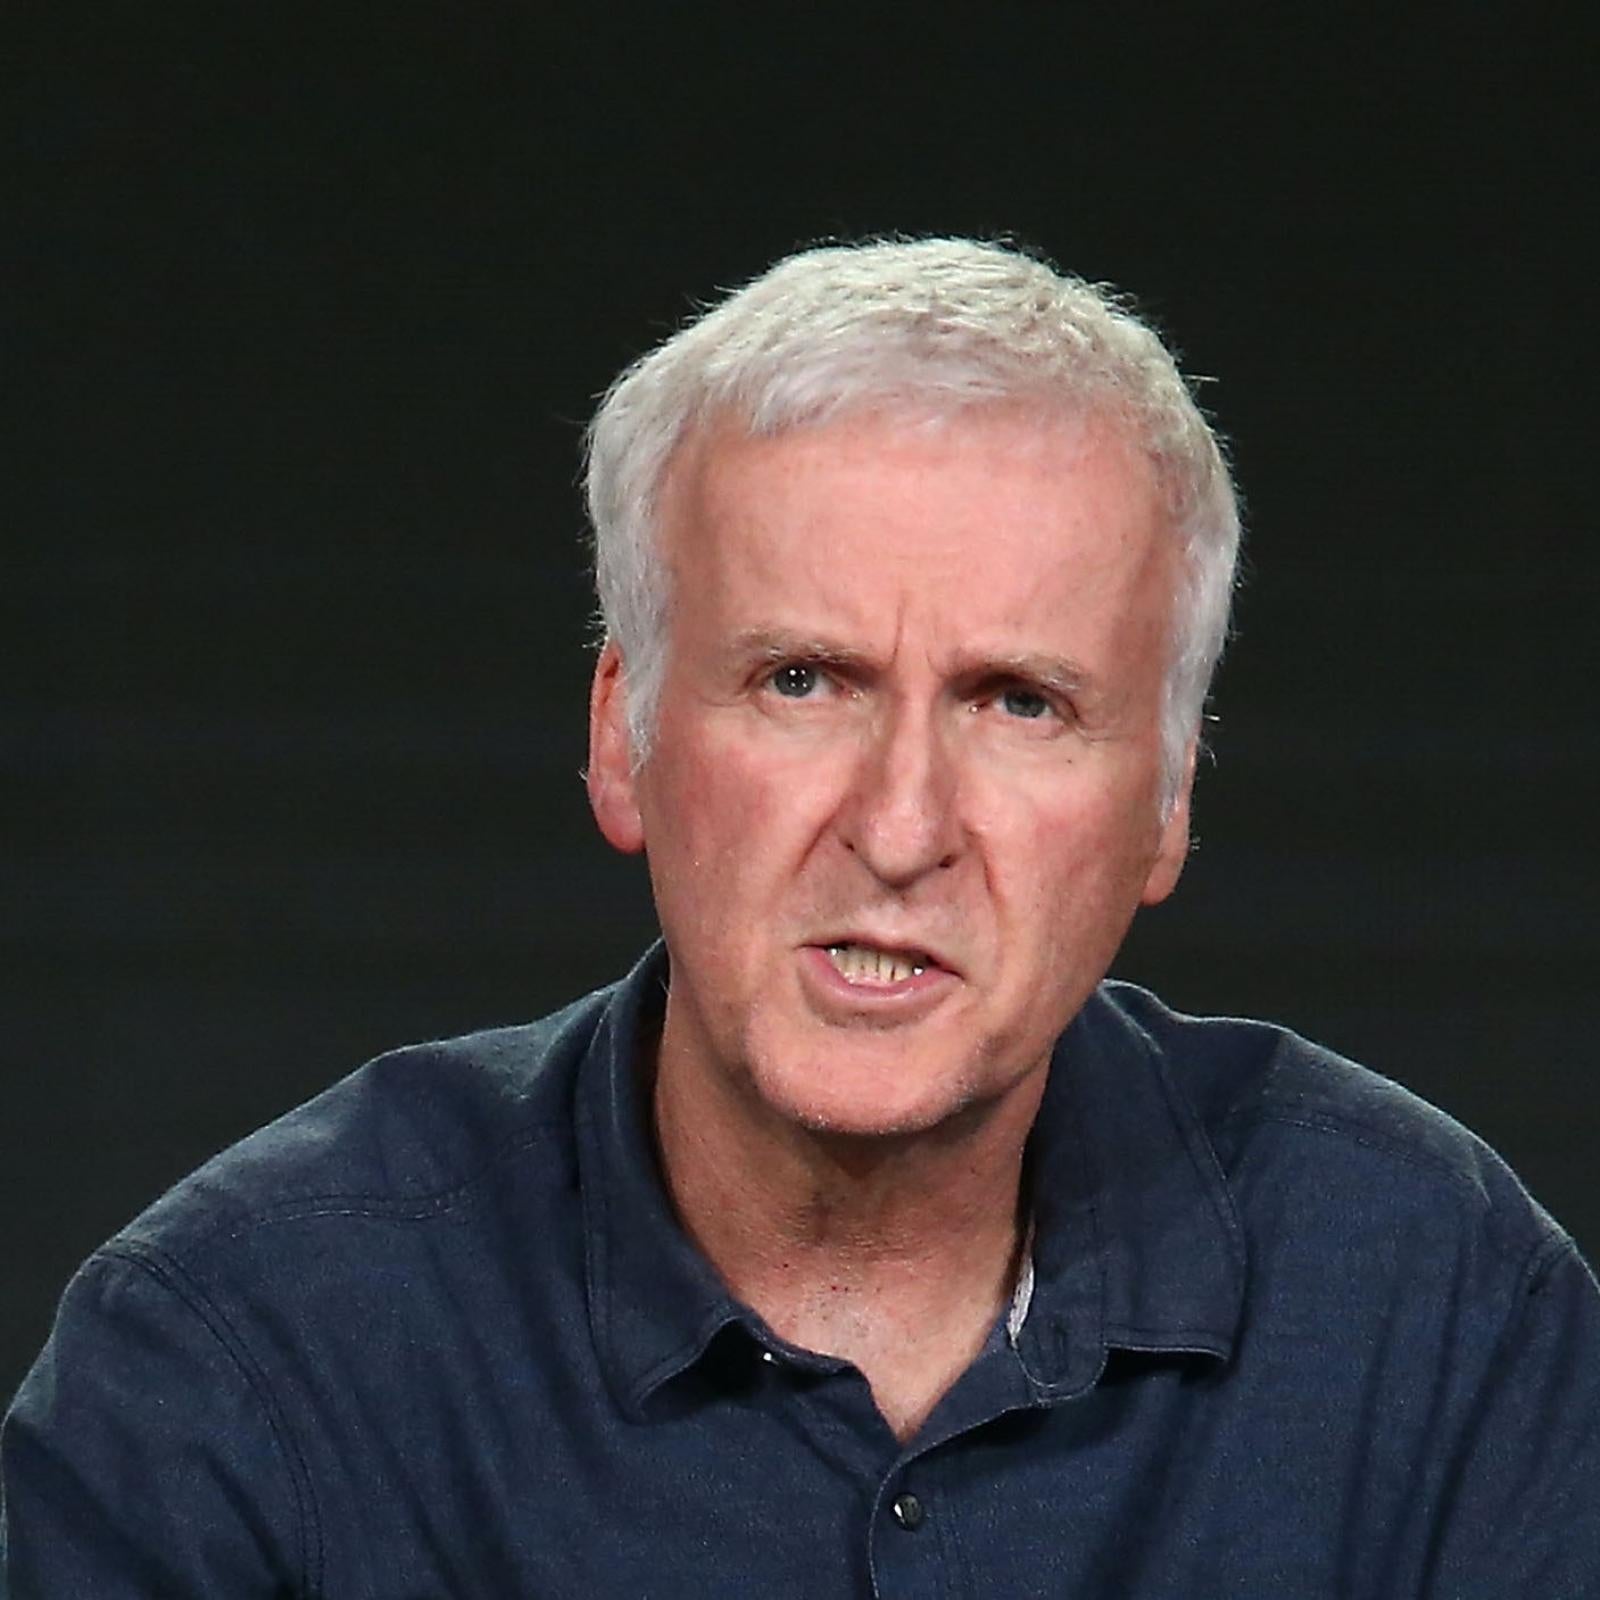 Avatar director James Cameron joins  tribe's fight to halt